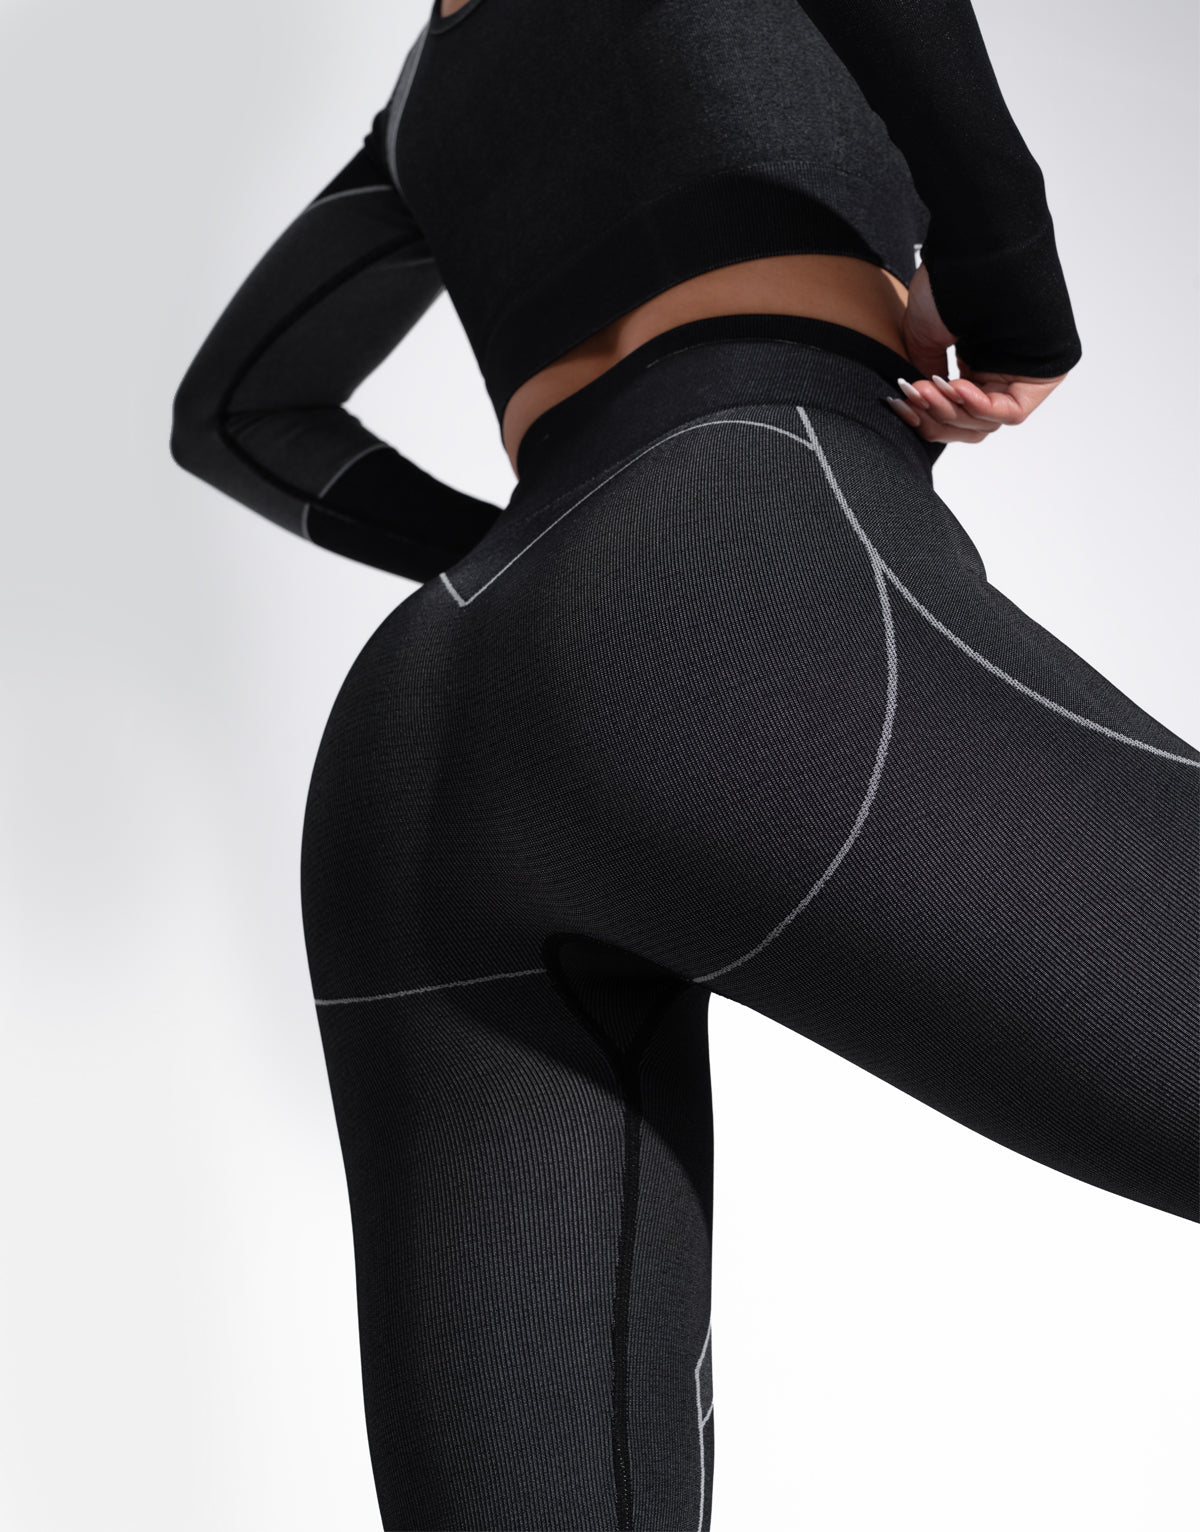 PACE LINES BLACK SEAMLESS